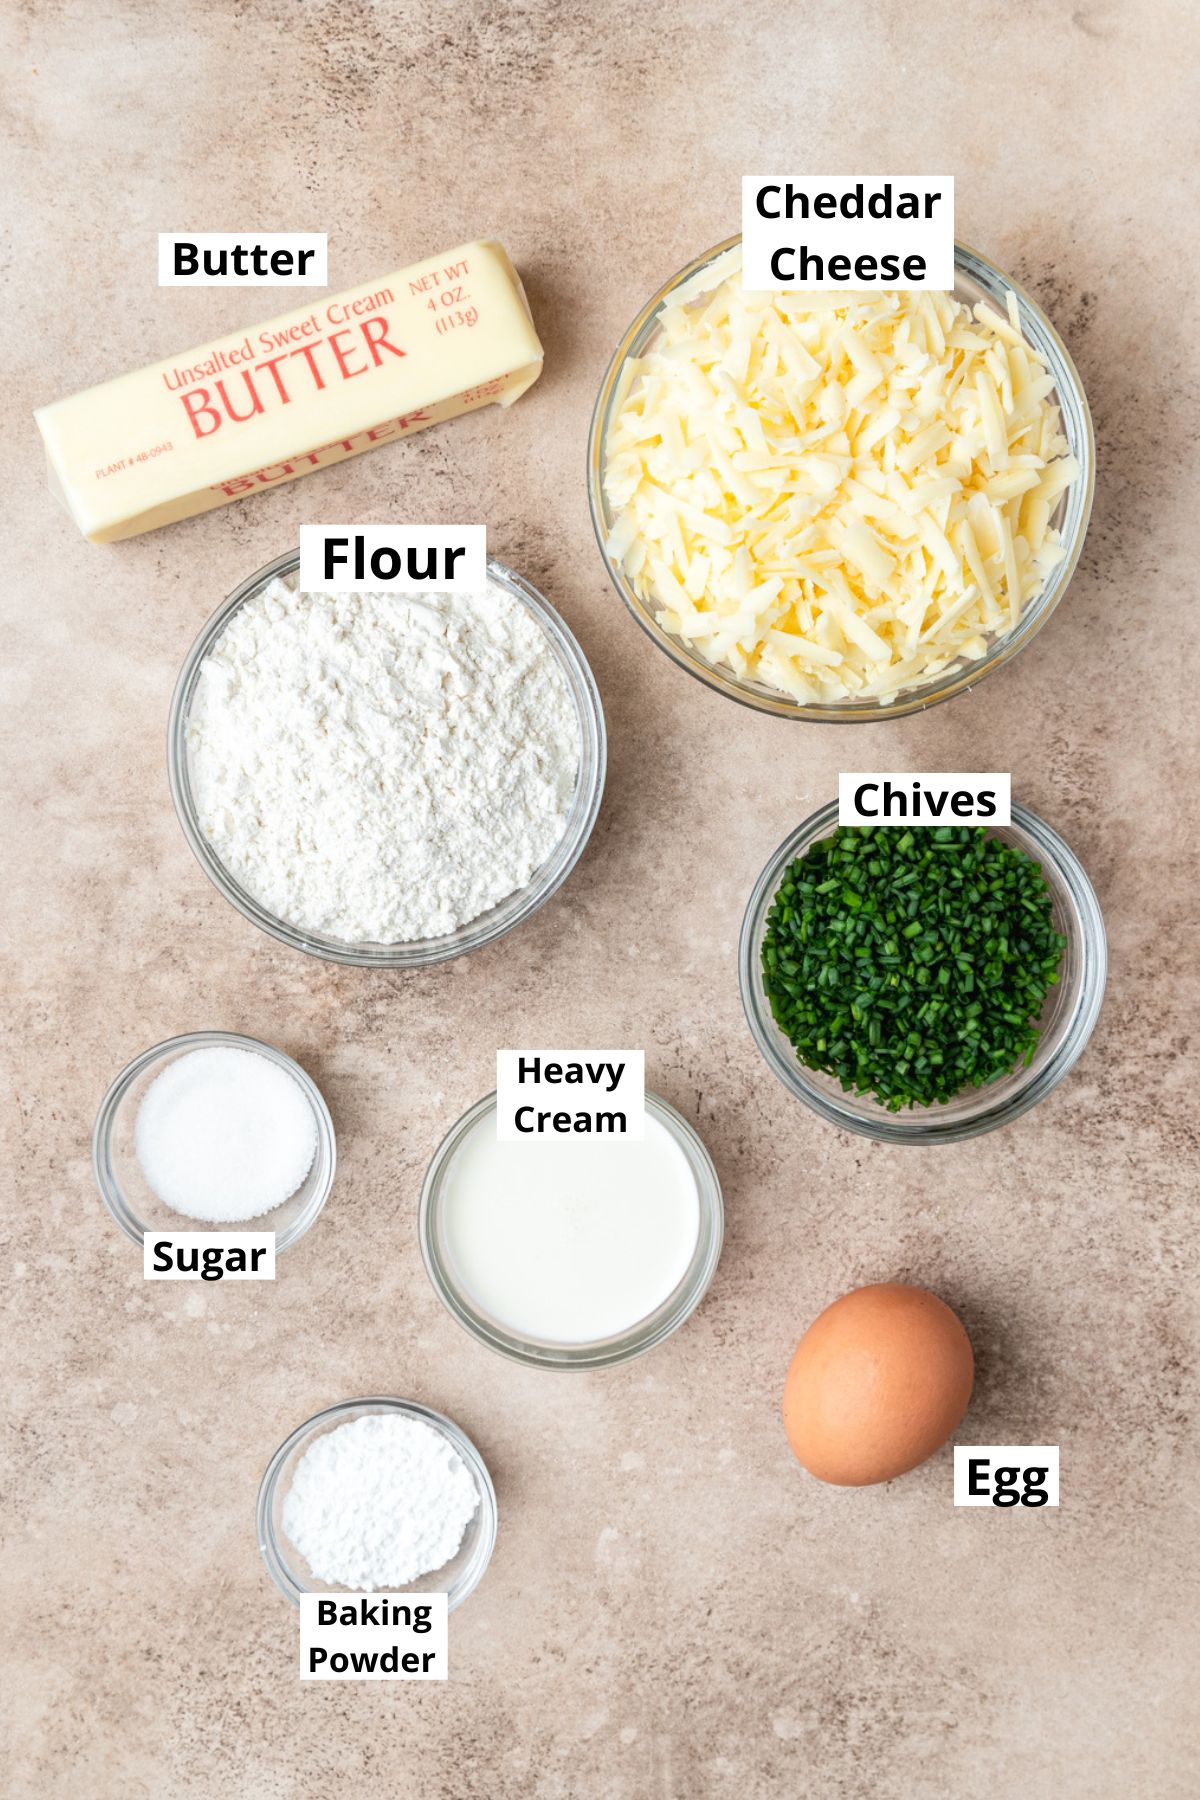 labeled ingredients for cheddar chive scones.